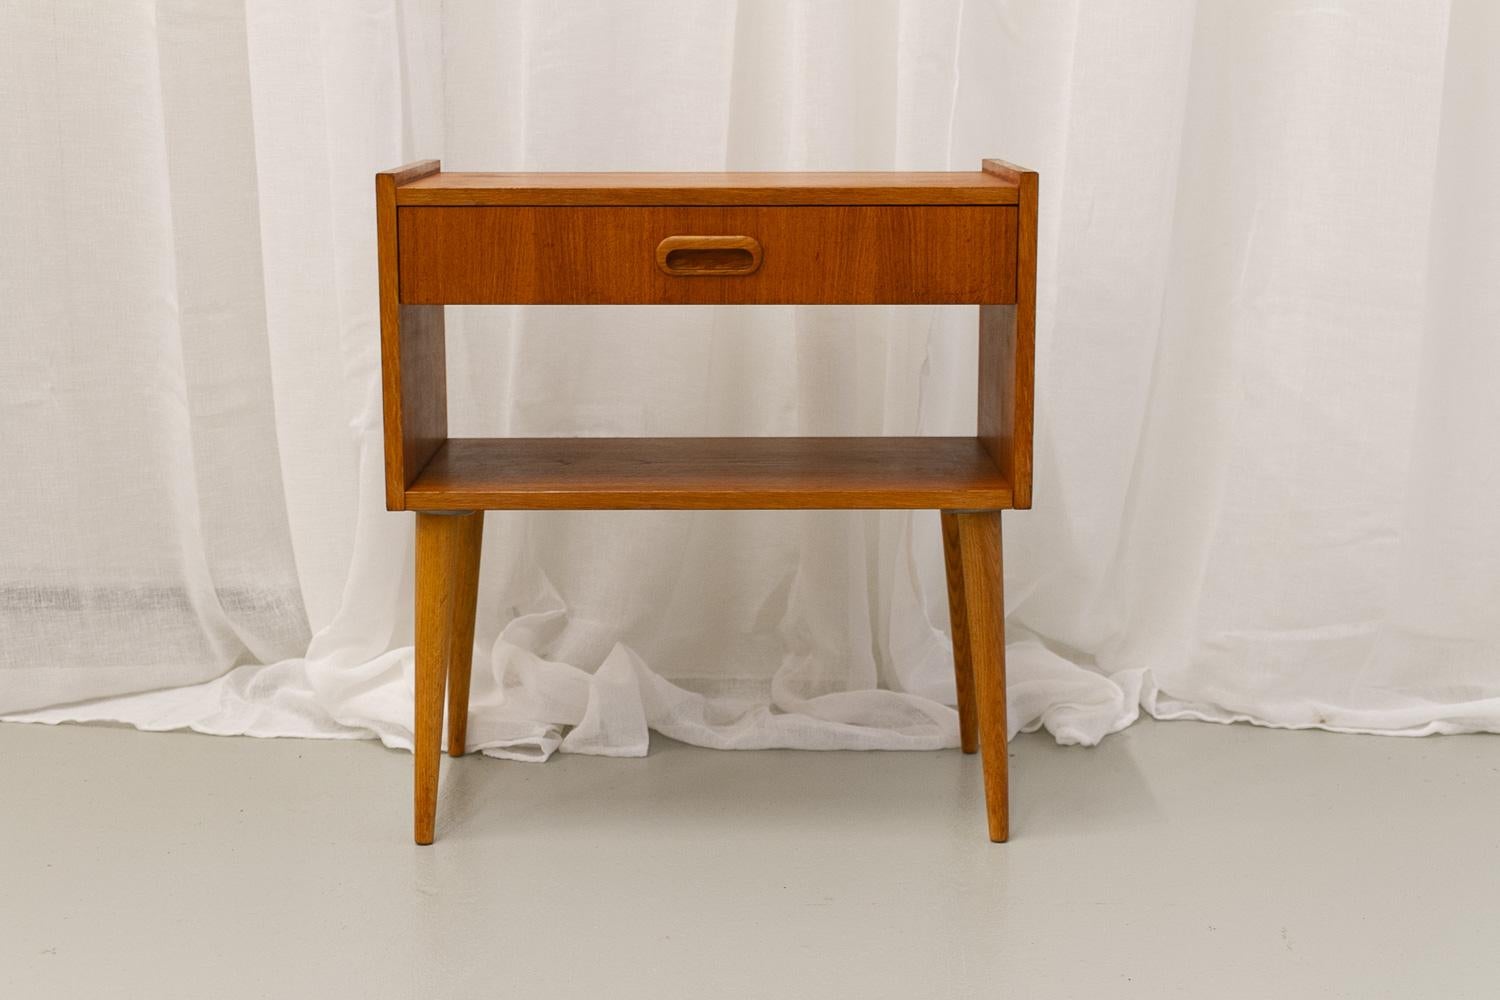 Scandinavian Modern Teak Night Stand, 1960s.
Lovely small bedside table in teak veneer with single drawer and open shelf. Round tapered legs in solid oak.
Elegant and versatile.
Good vintage condition with patina consistent with age and use